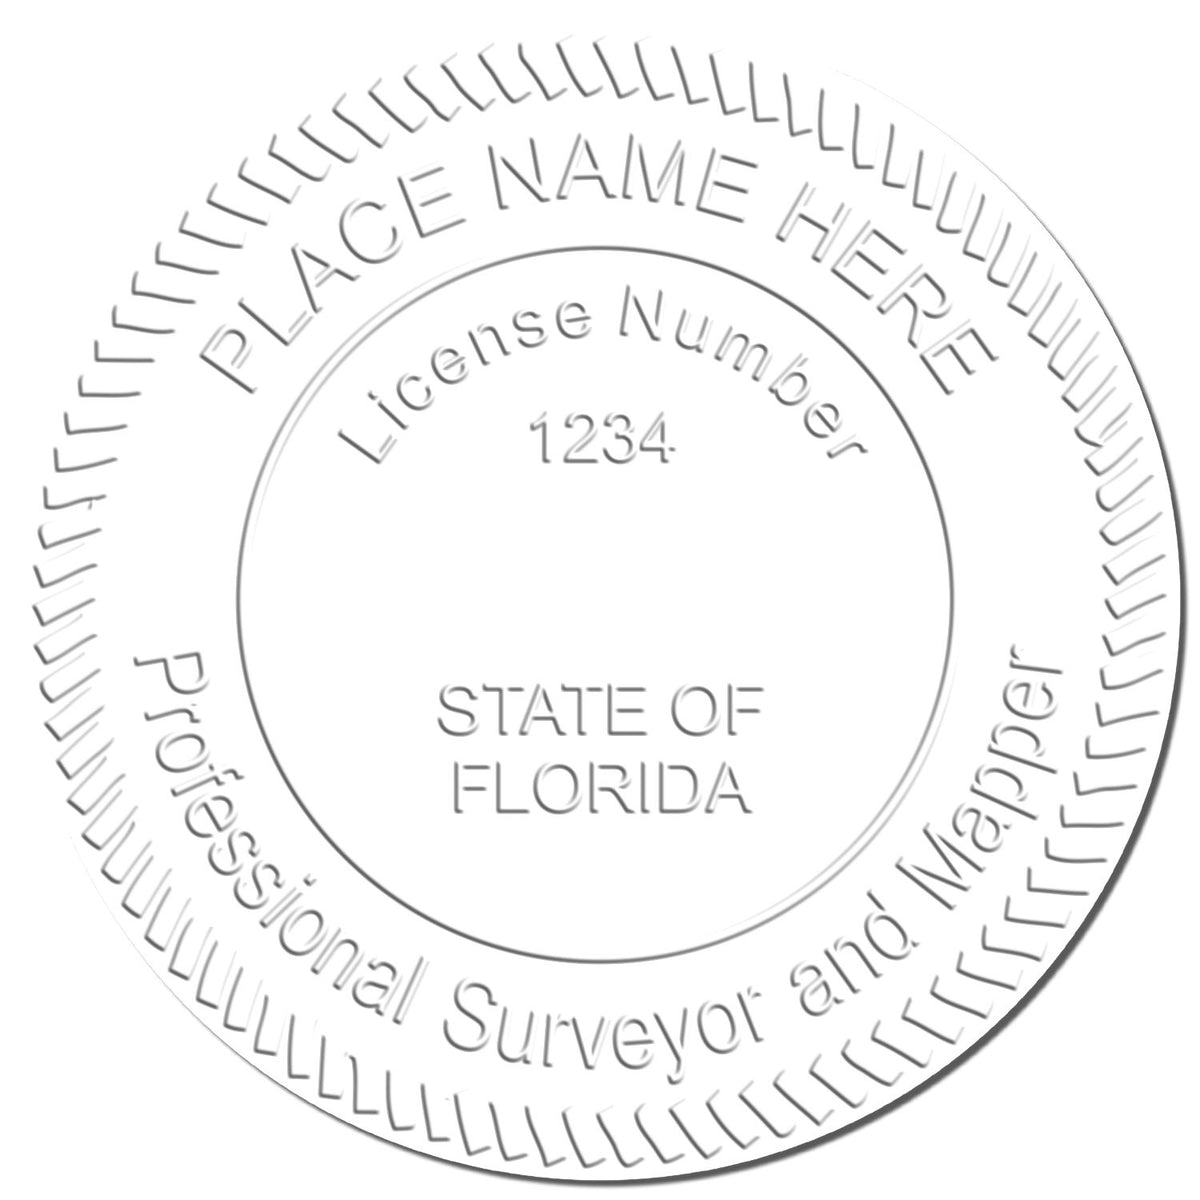 This paper is stamped with a sample imprint of the Heavy Duty Cast Iron Florida Land Surveyor Seal Embosser, signifying its quality and reliability.